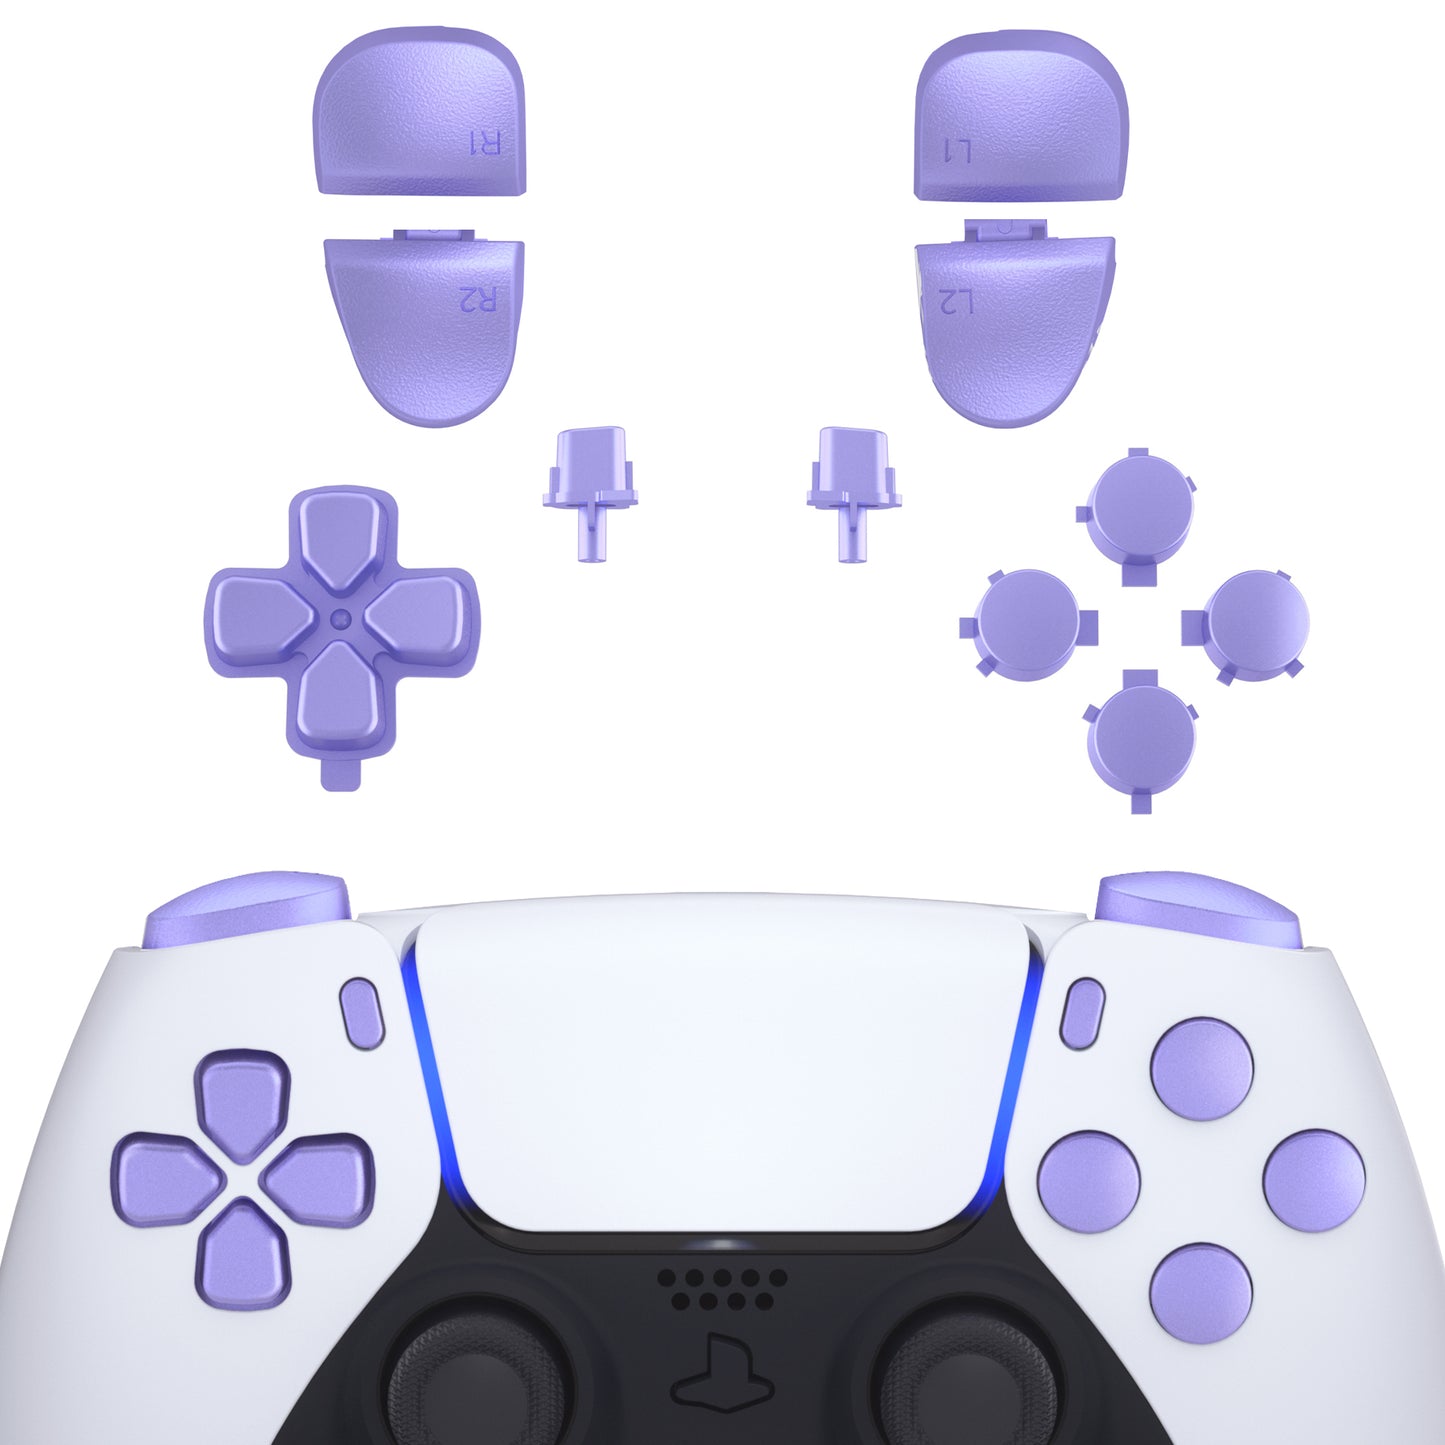 eXtremeRate Retail Replacement D-pad R1 L1 R2 L2 Triggers Share Options Face Buttons, Metallic Snowstorm Mauve Full Set Buttons Compatible with ps5 Controller BDM-030 - JPF1043G3